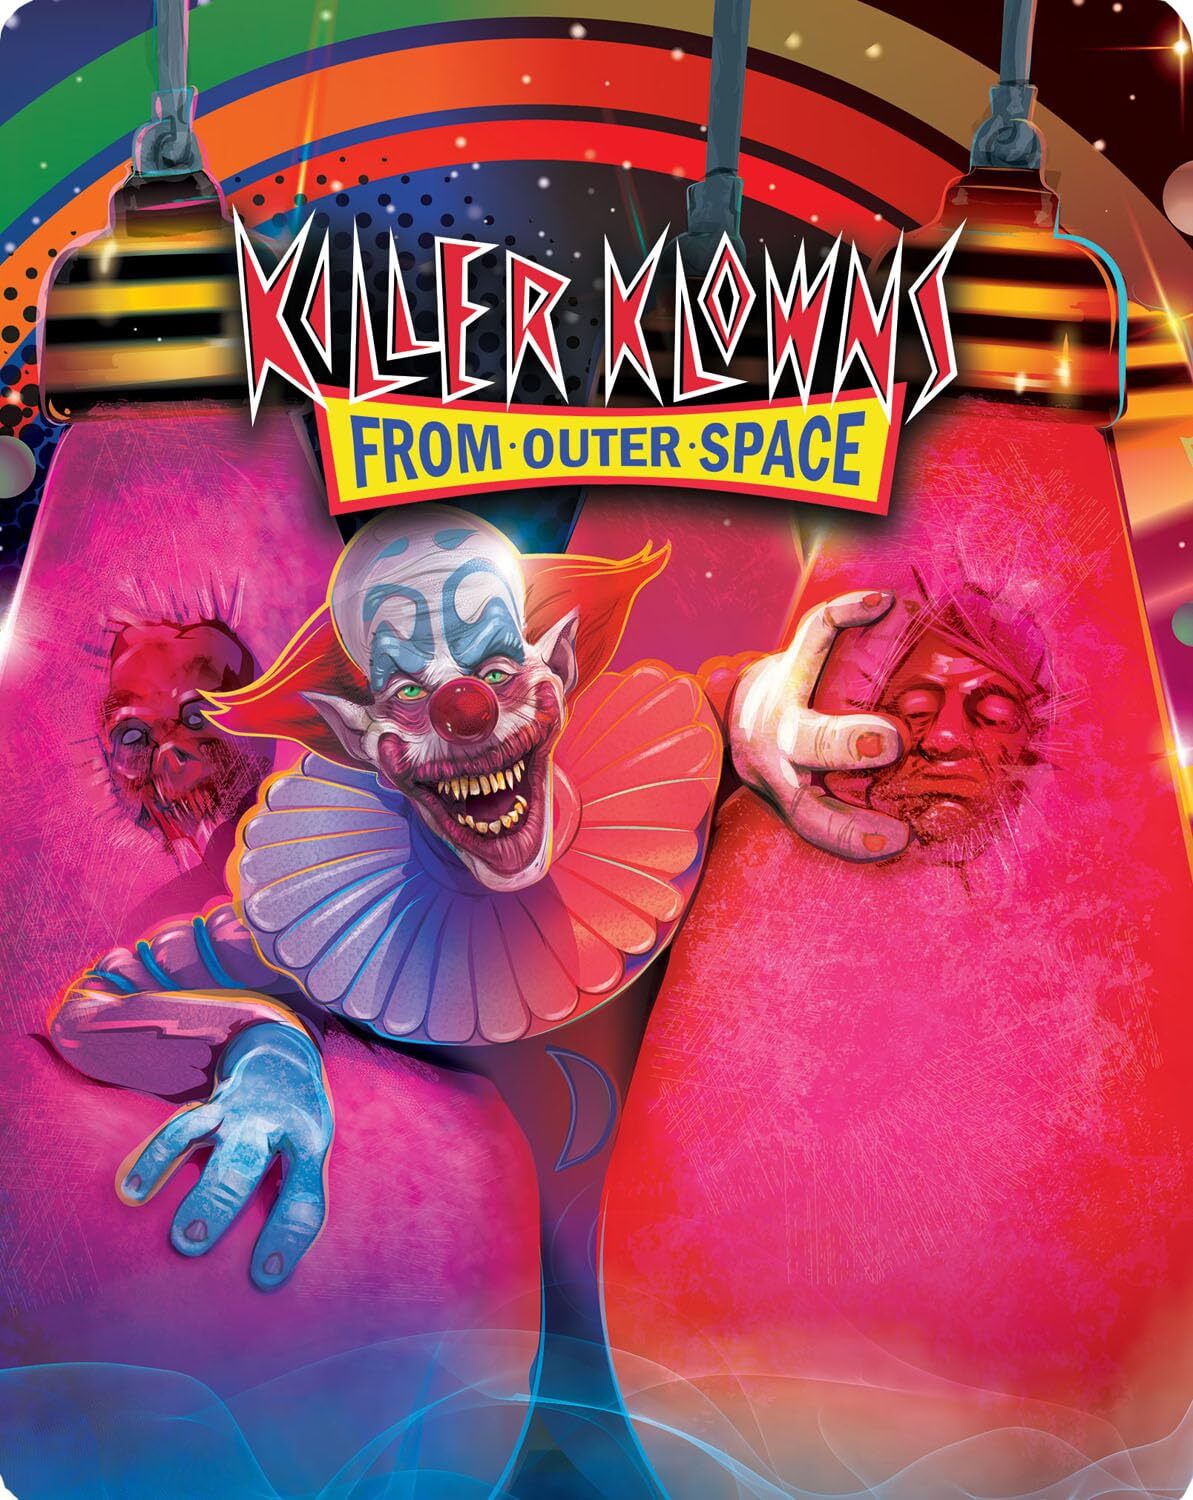 KILLER KLOWNS FROM OUTER SPACE (LIMITED EDITION) 4K UHD/BLU-RAY STEELBOOK